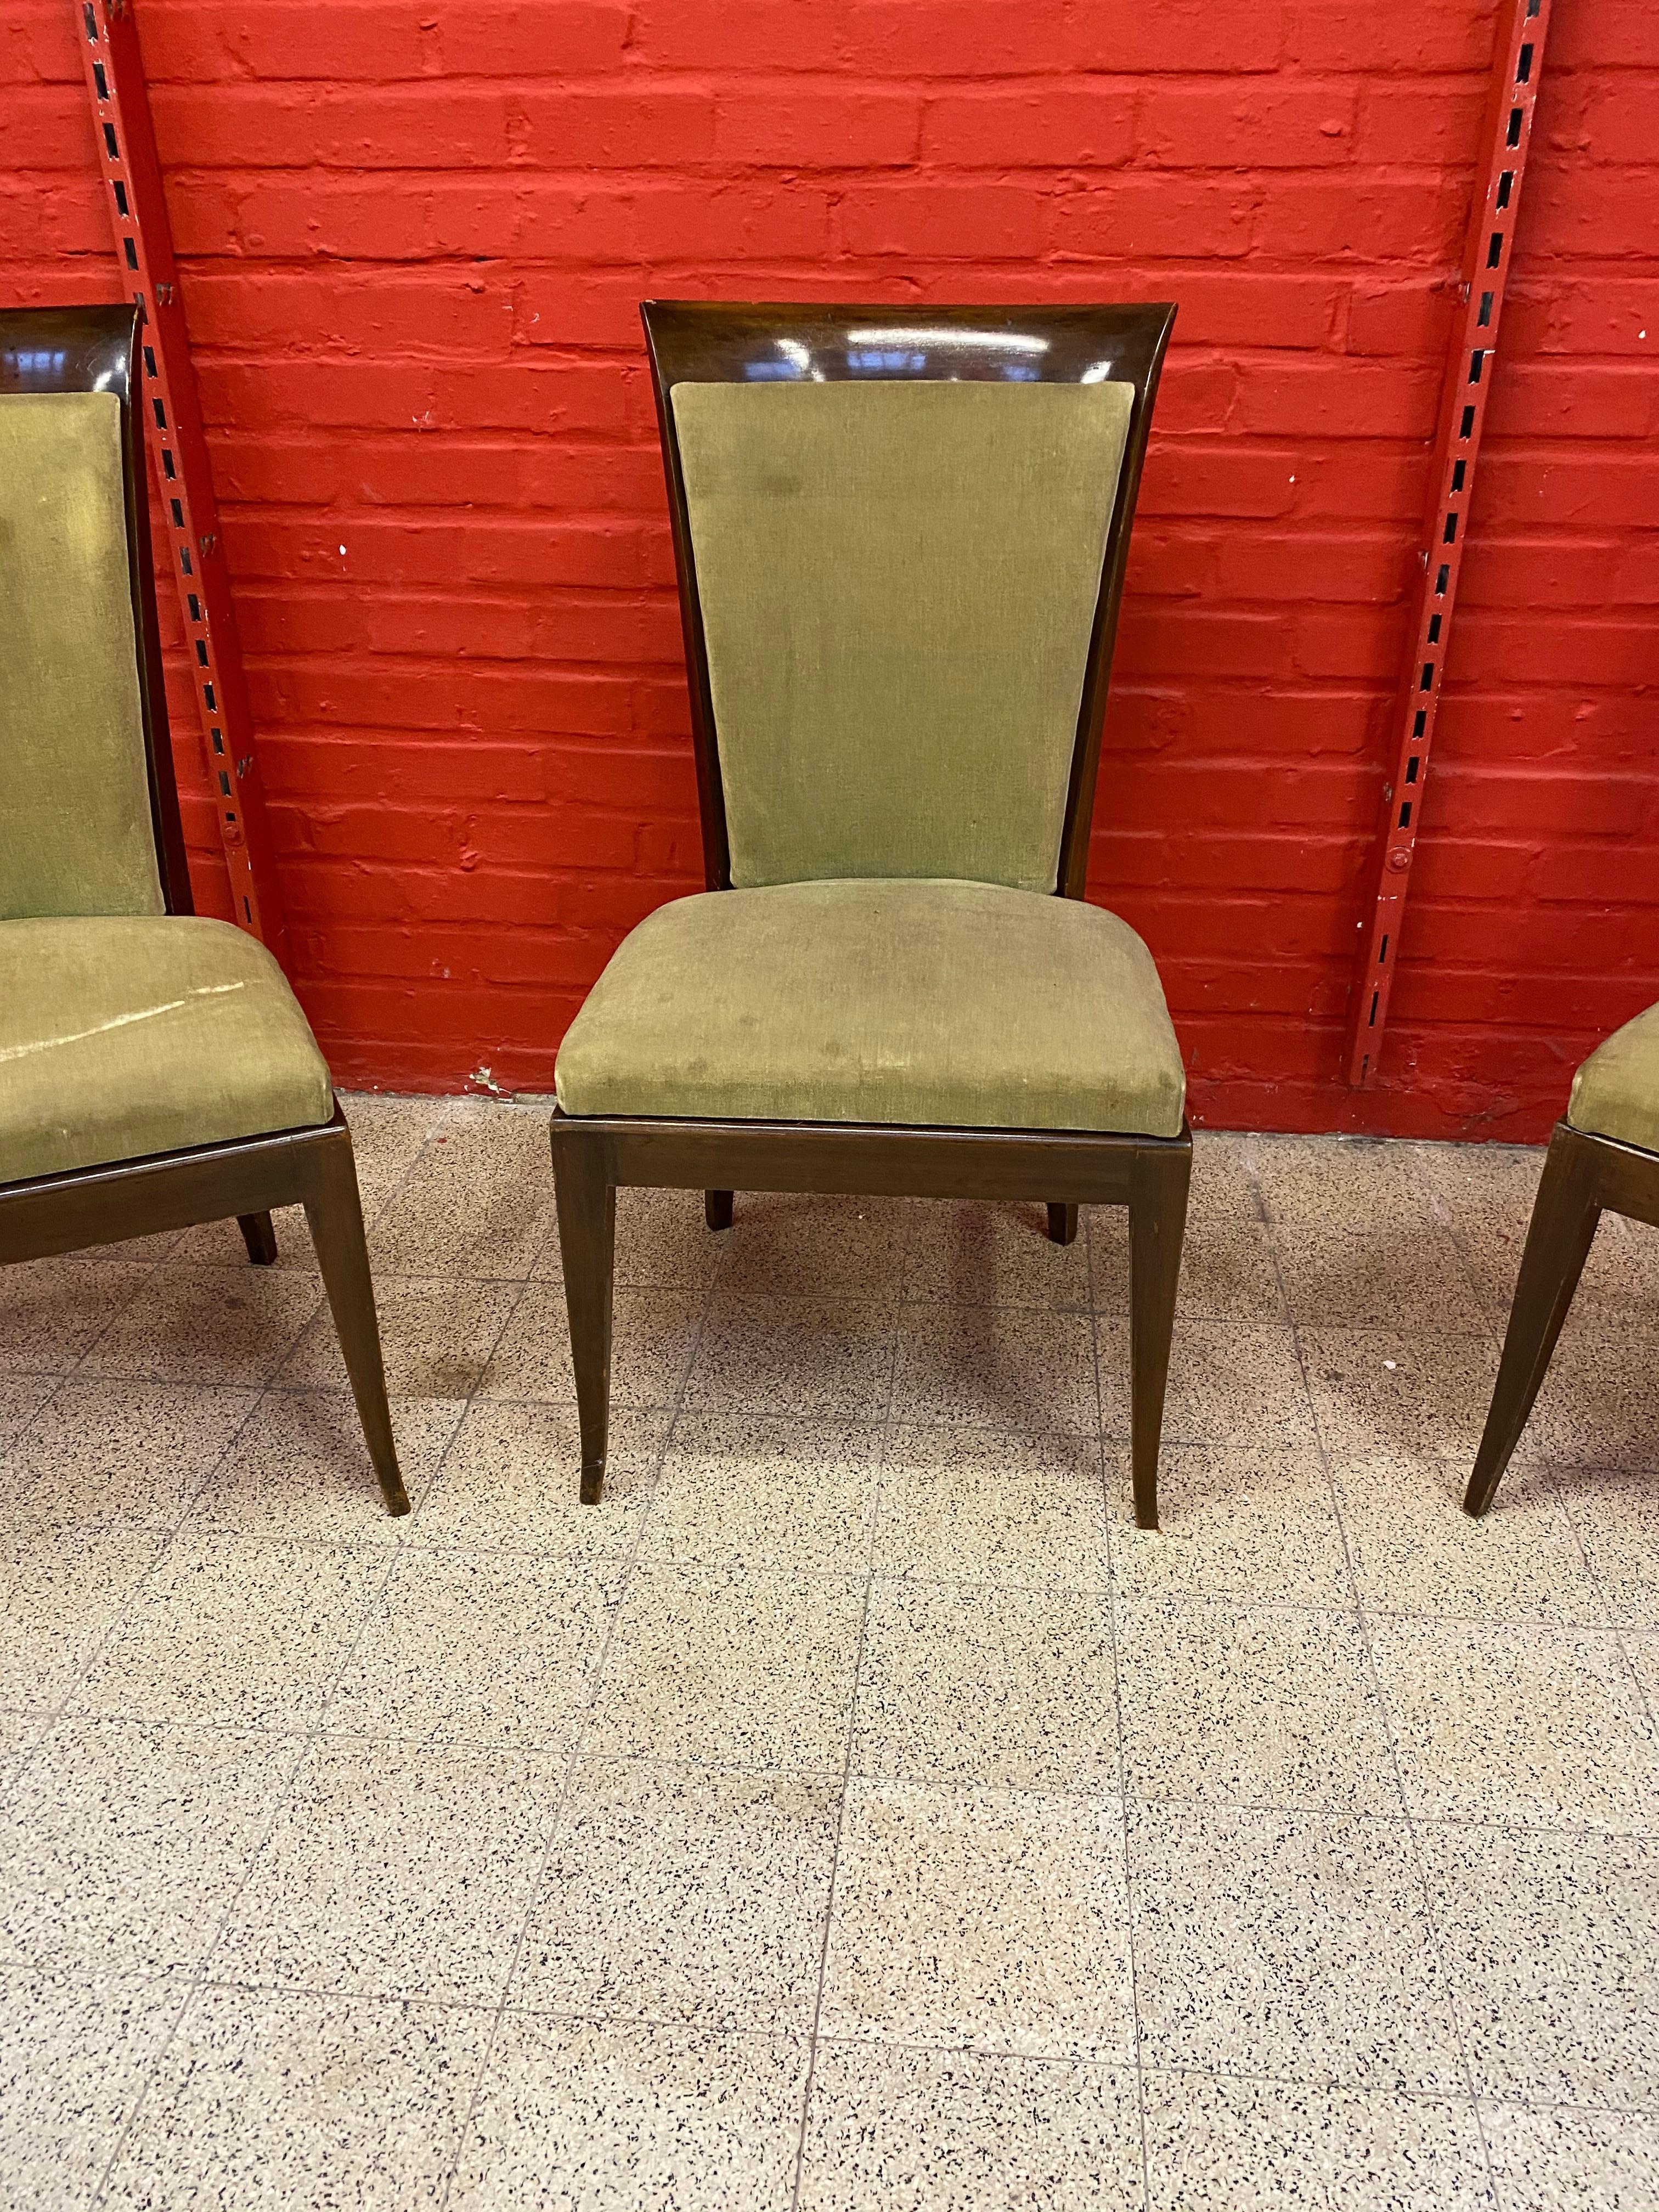 De Coene, 3 large Art Deco chairs in solid mahogany and velvet, circa 1930
small chips on 1 chair.